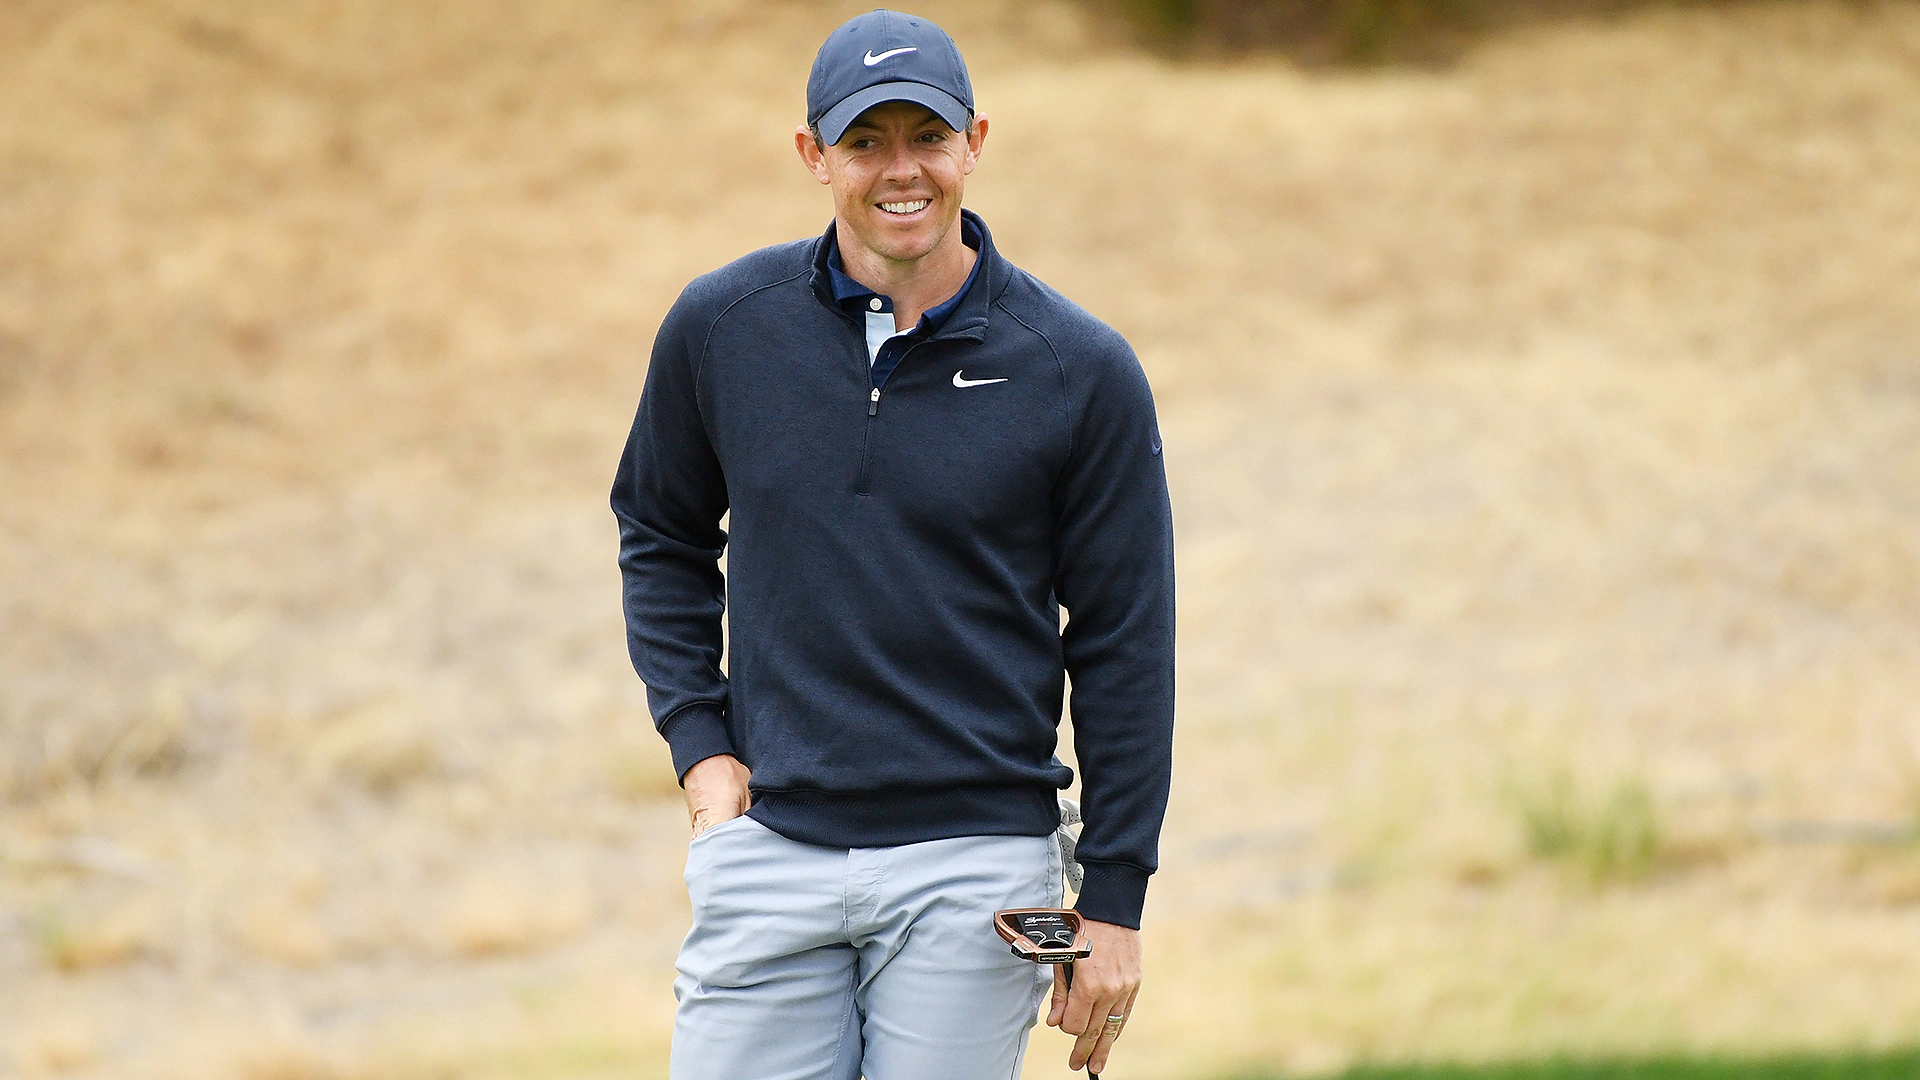 After snapping club on Thursday, Rory McIlroy rebounds with 67 on Day 2 of Zozo